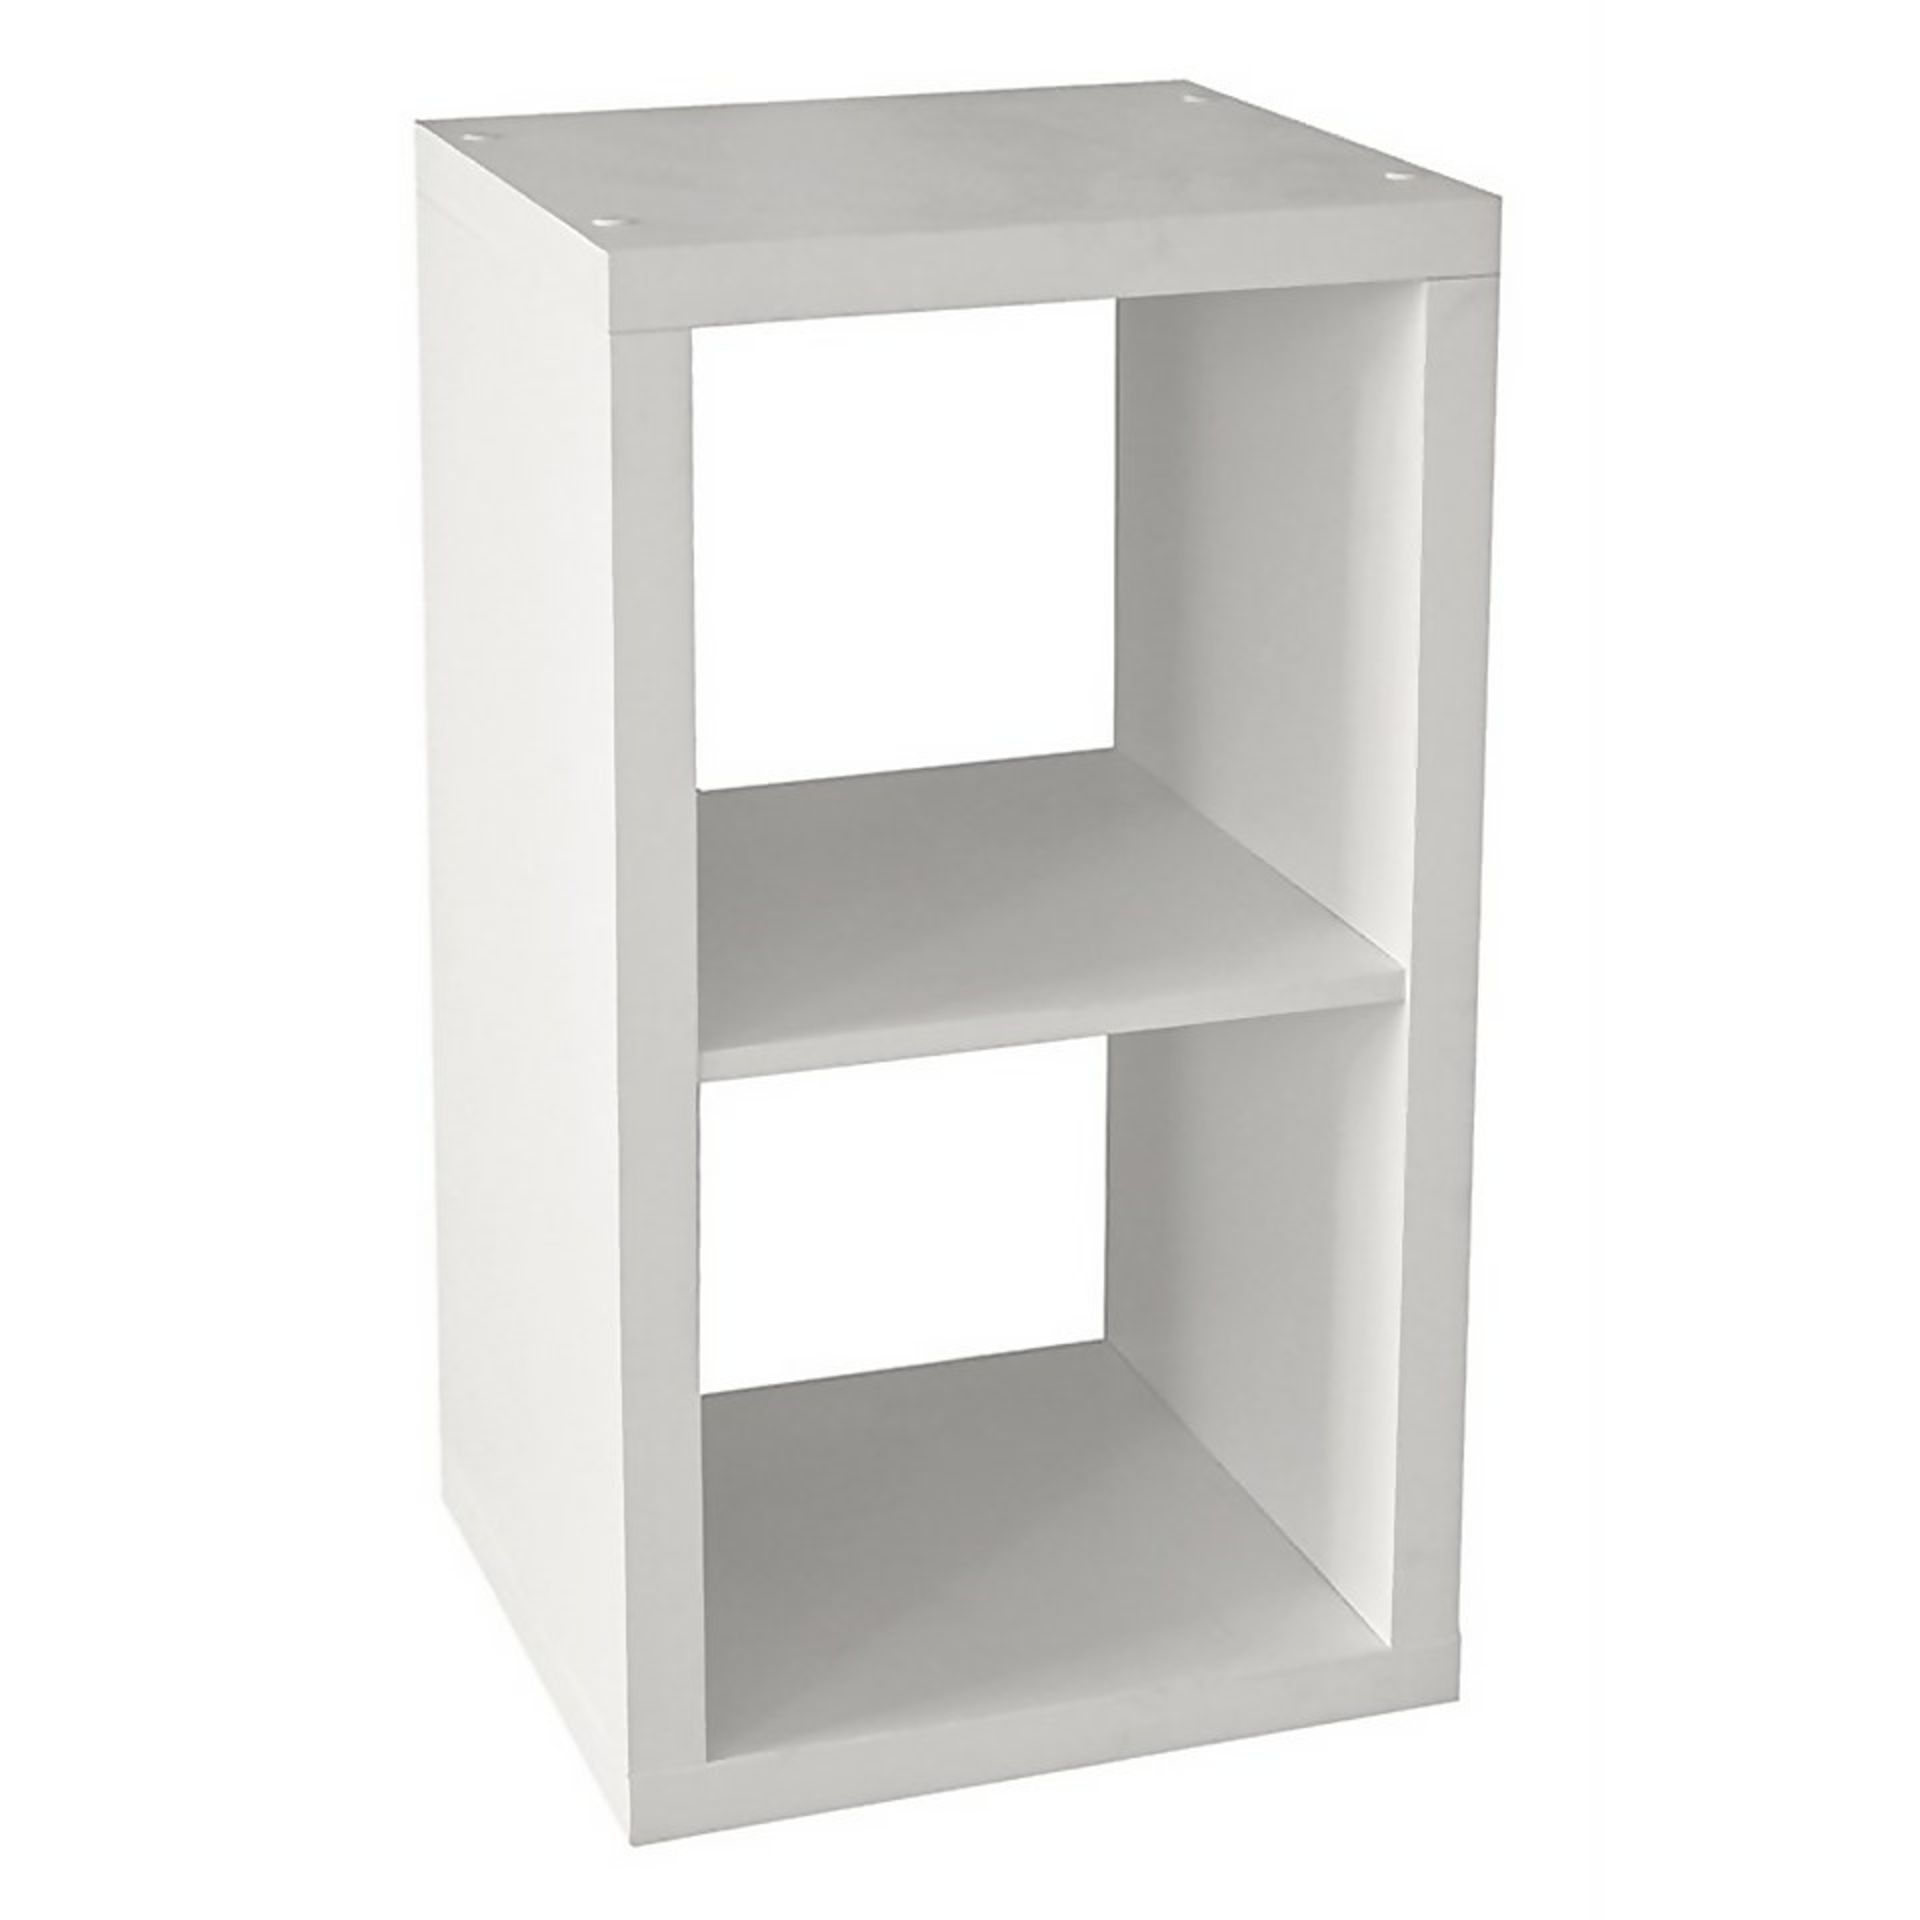 (R7I) 1 X Living Elements Clever Cube 1x2 Cube Storage System White Matt Finish (H760mmxW410mmxD390 - Image 3 of 4